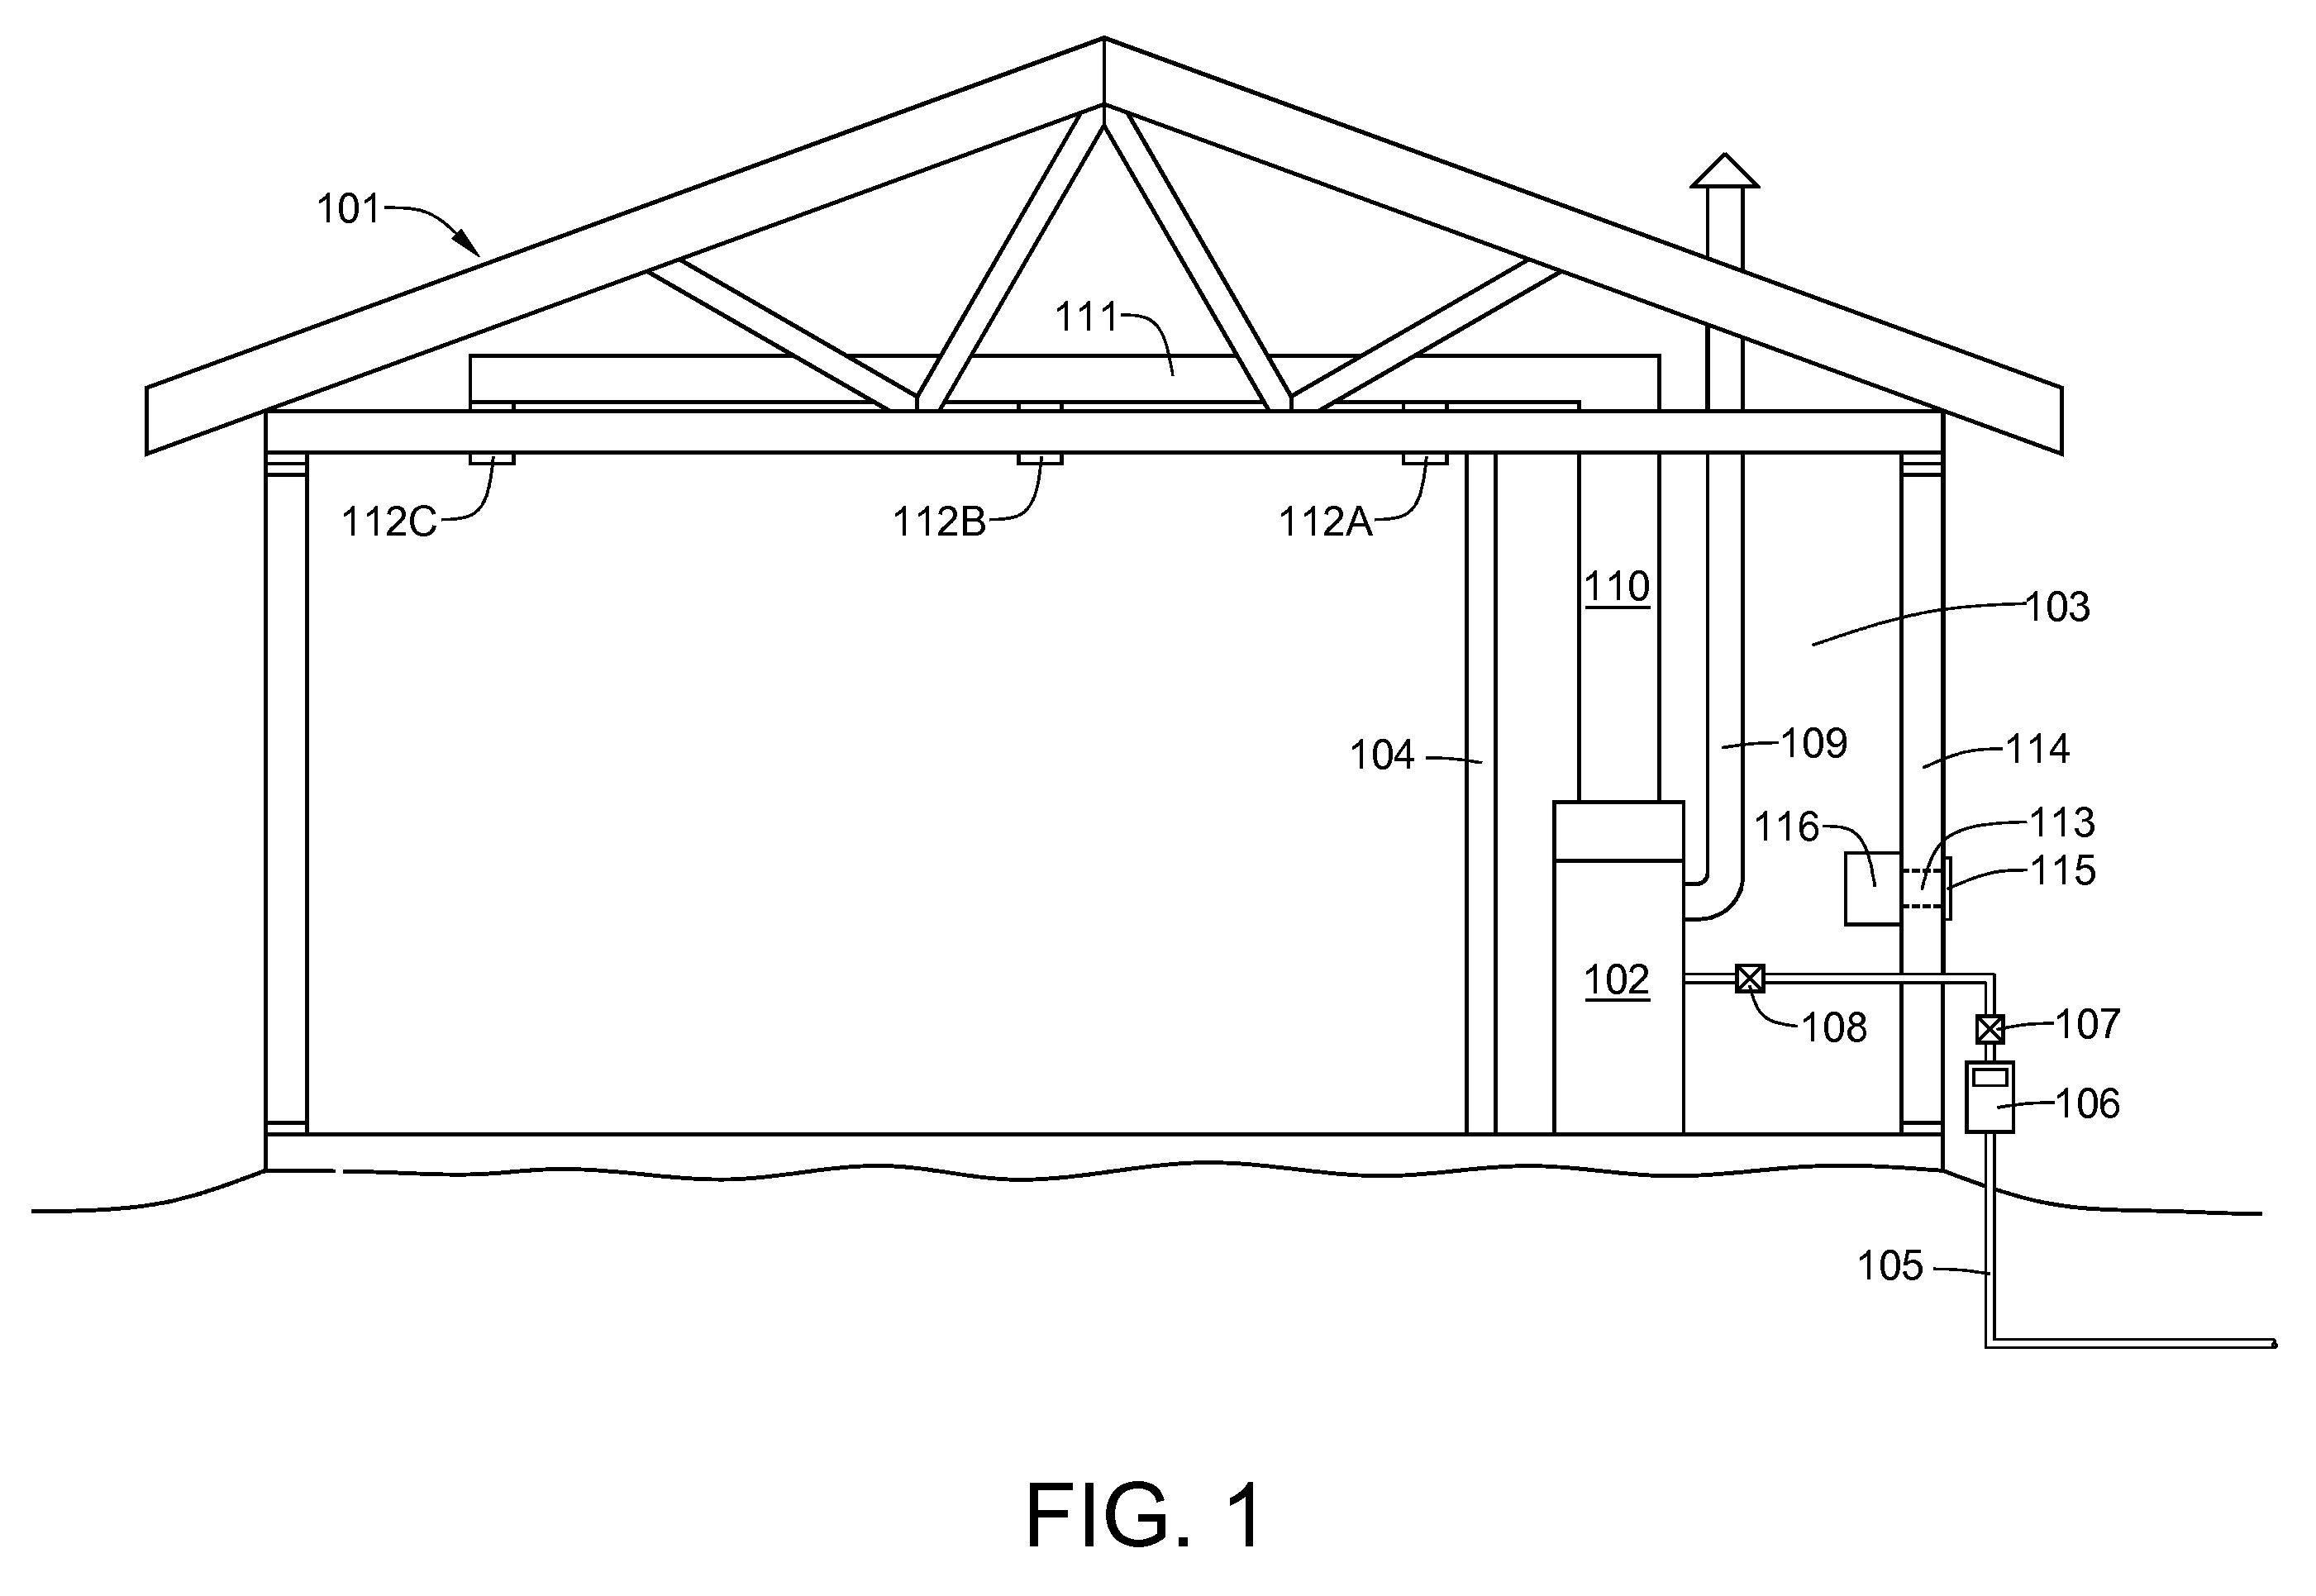 Combustion air vent control for furnaces